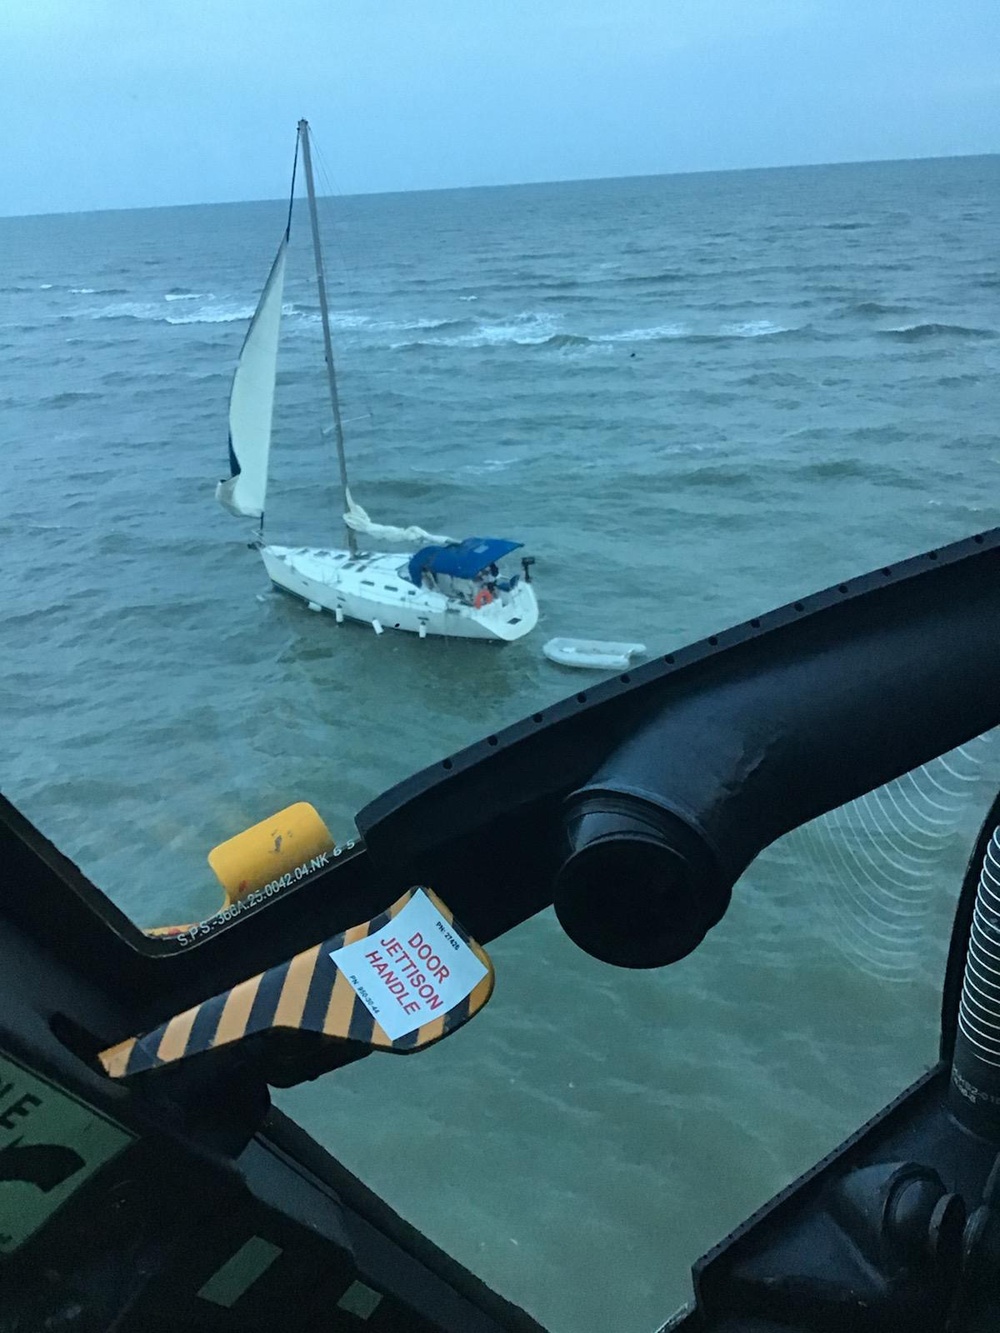 Coast Guard rescues 2 after sailing vessel runs aground 3 miles east of Edisto Island